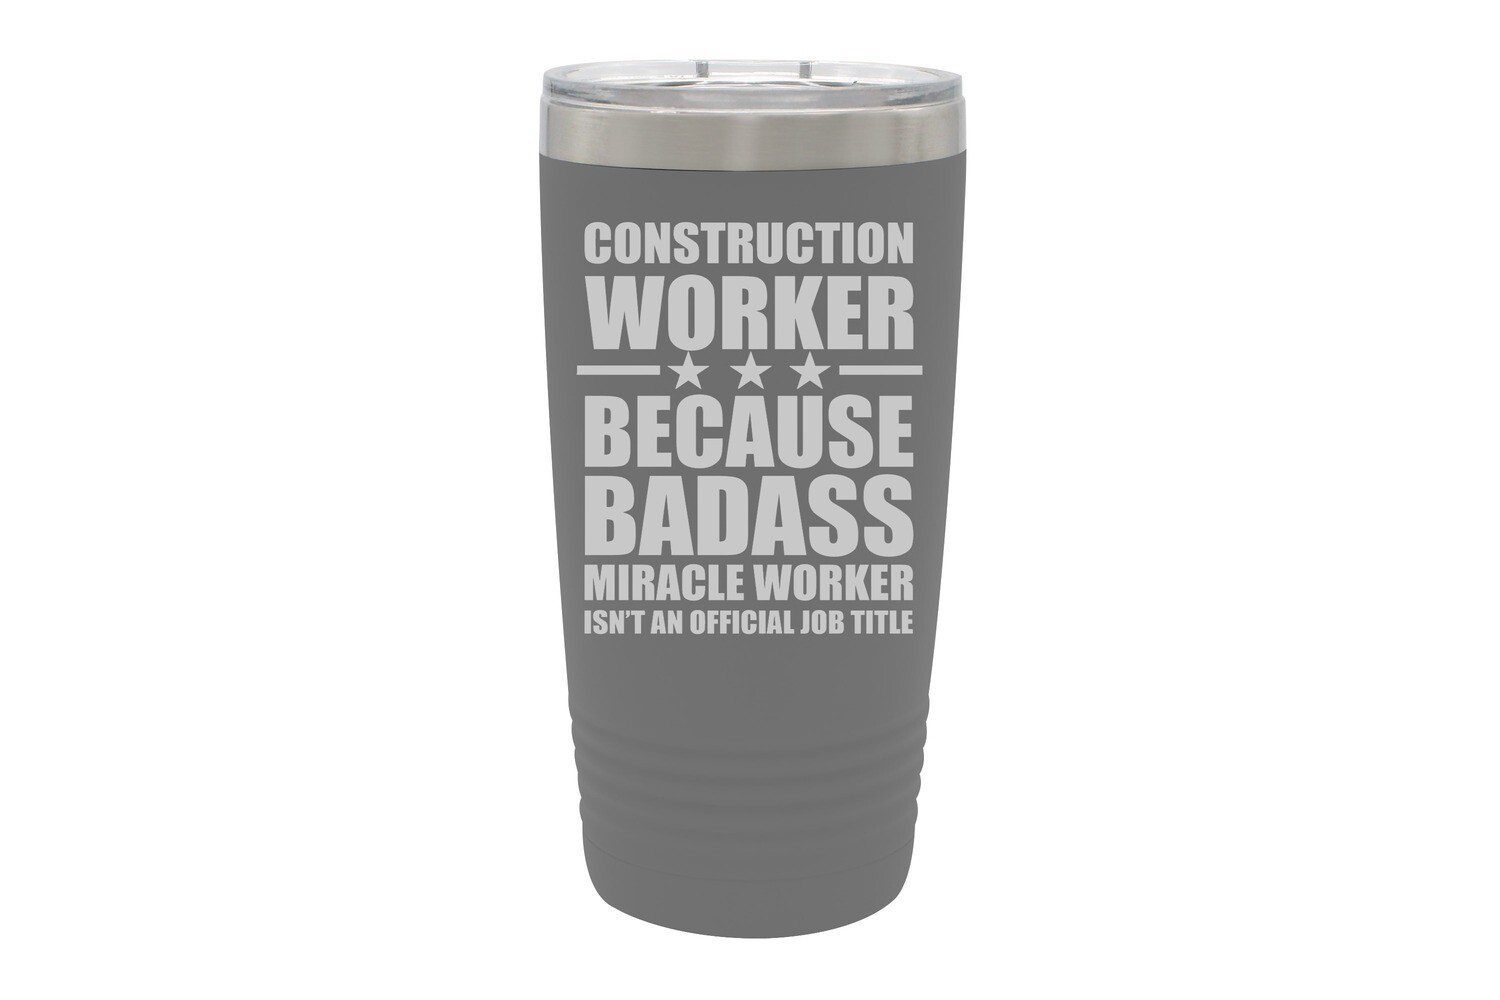 Construction Worker because Badass Miracle Worker isn't an Official Job Title Insulated Tumbler 20 oz